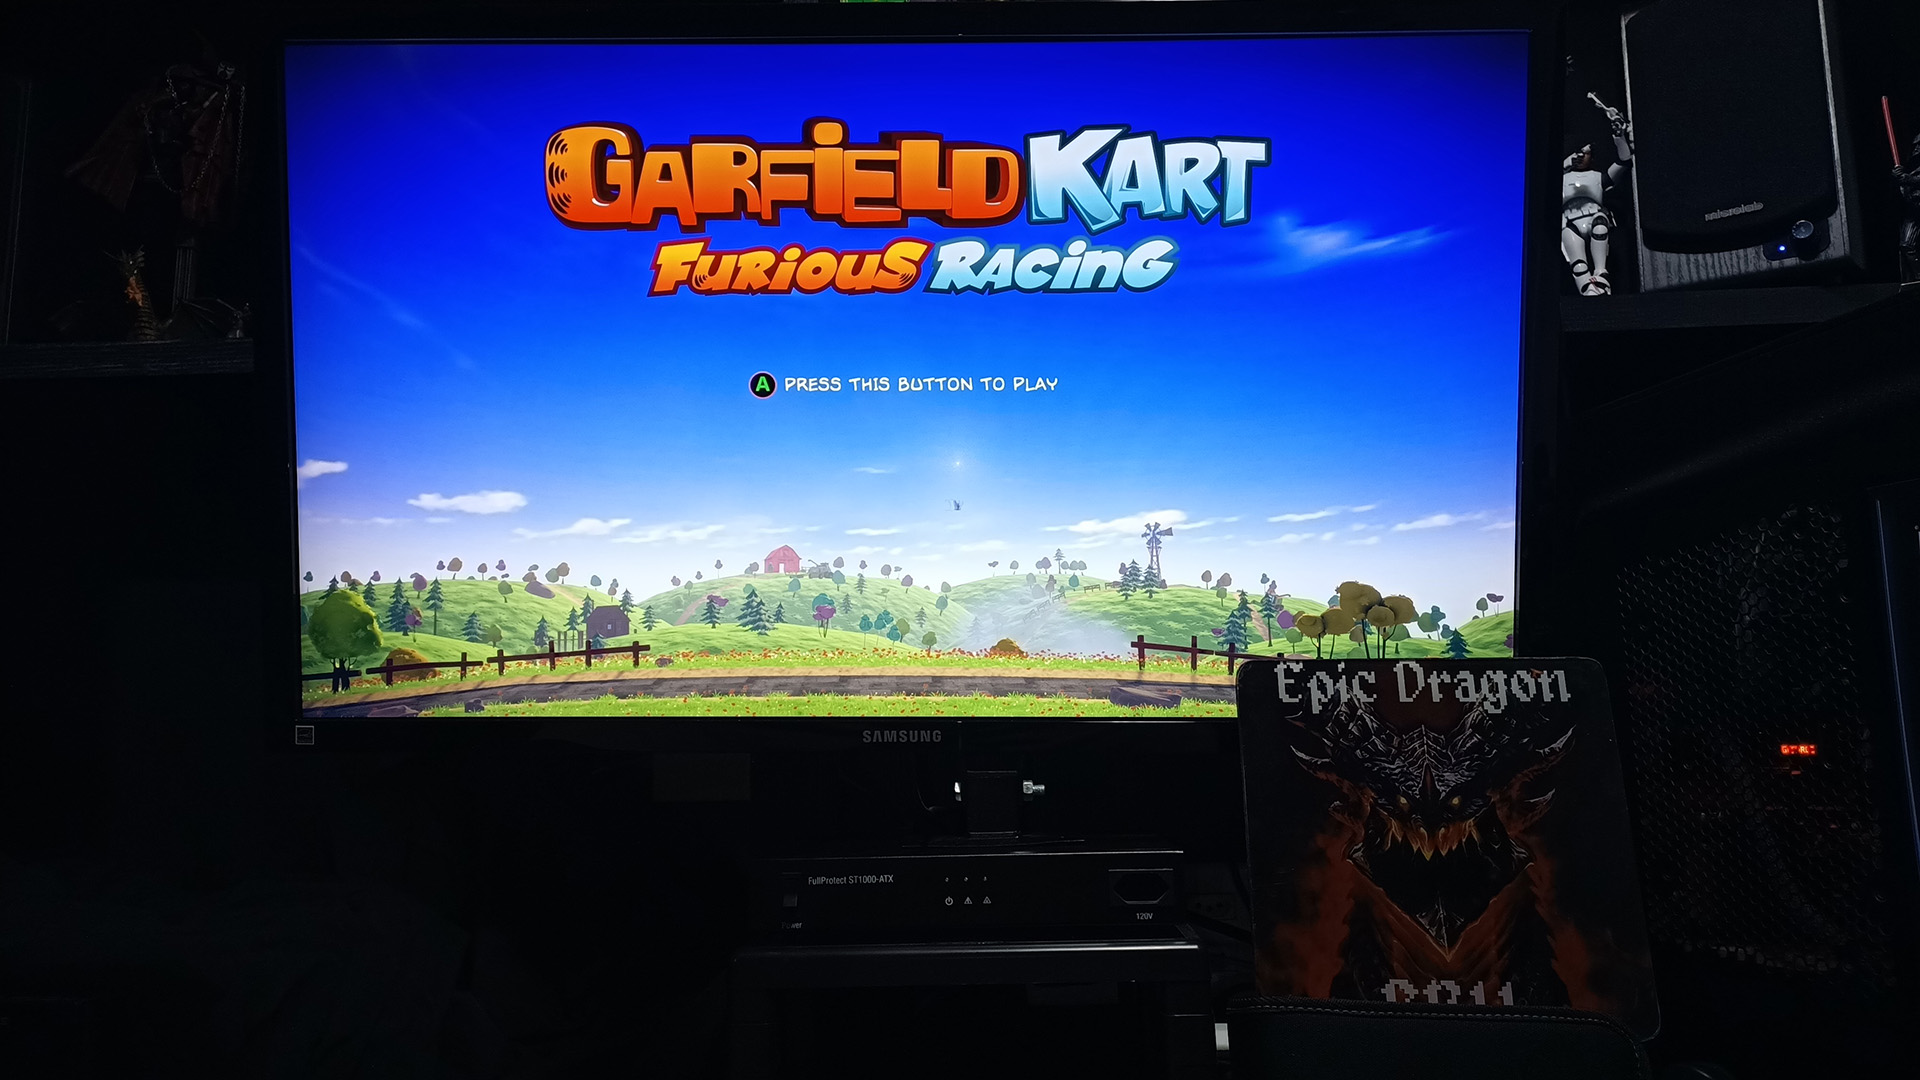 Garfield Kart Furious Racing: Blazing Oasis [Time Trial: 3 Laps] time of 0:02:43.79